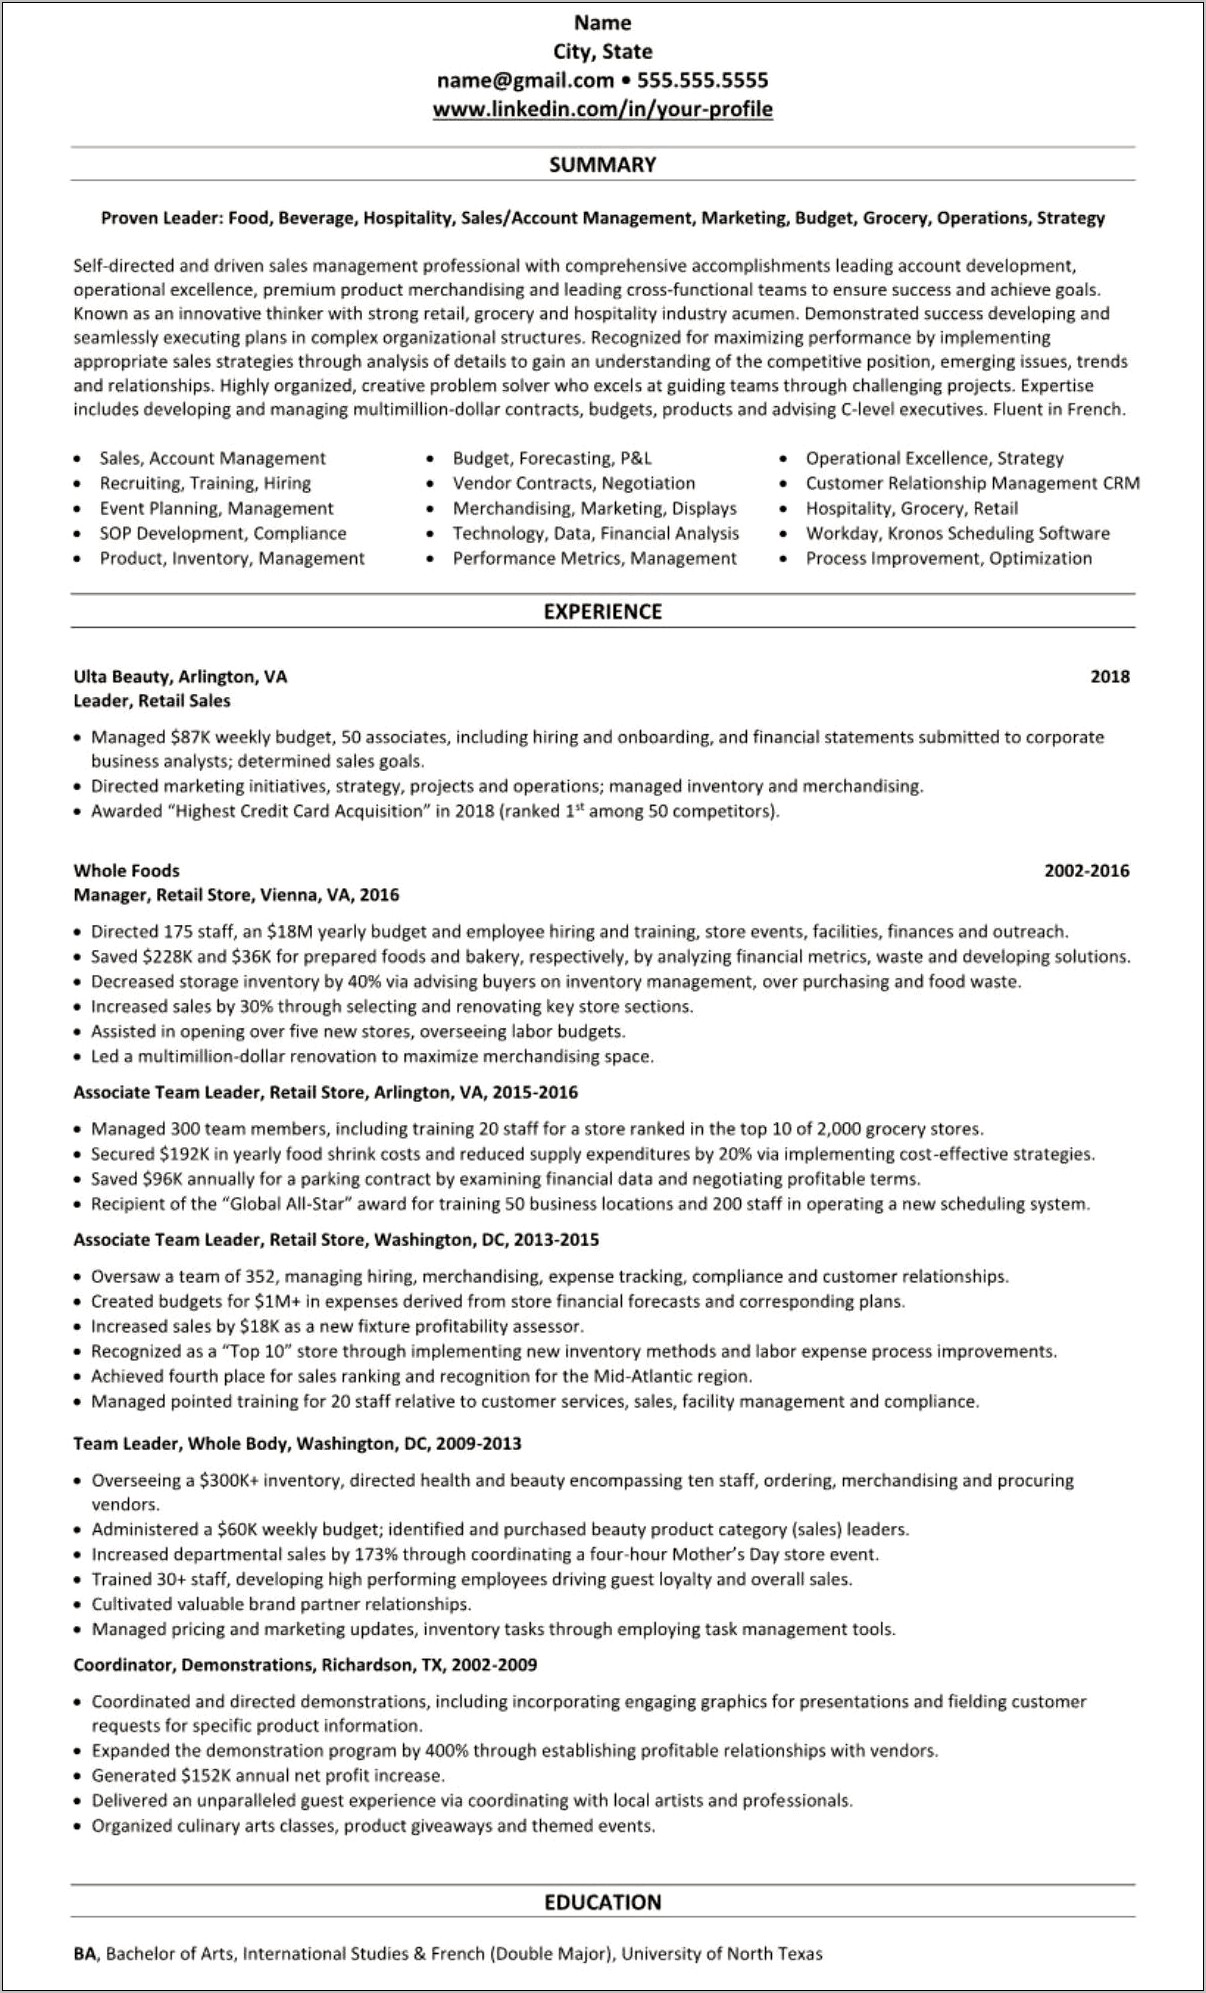 Example Summary For Retail Resume